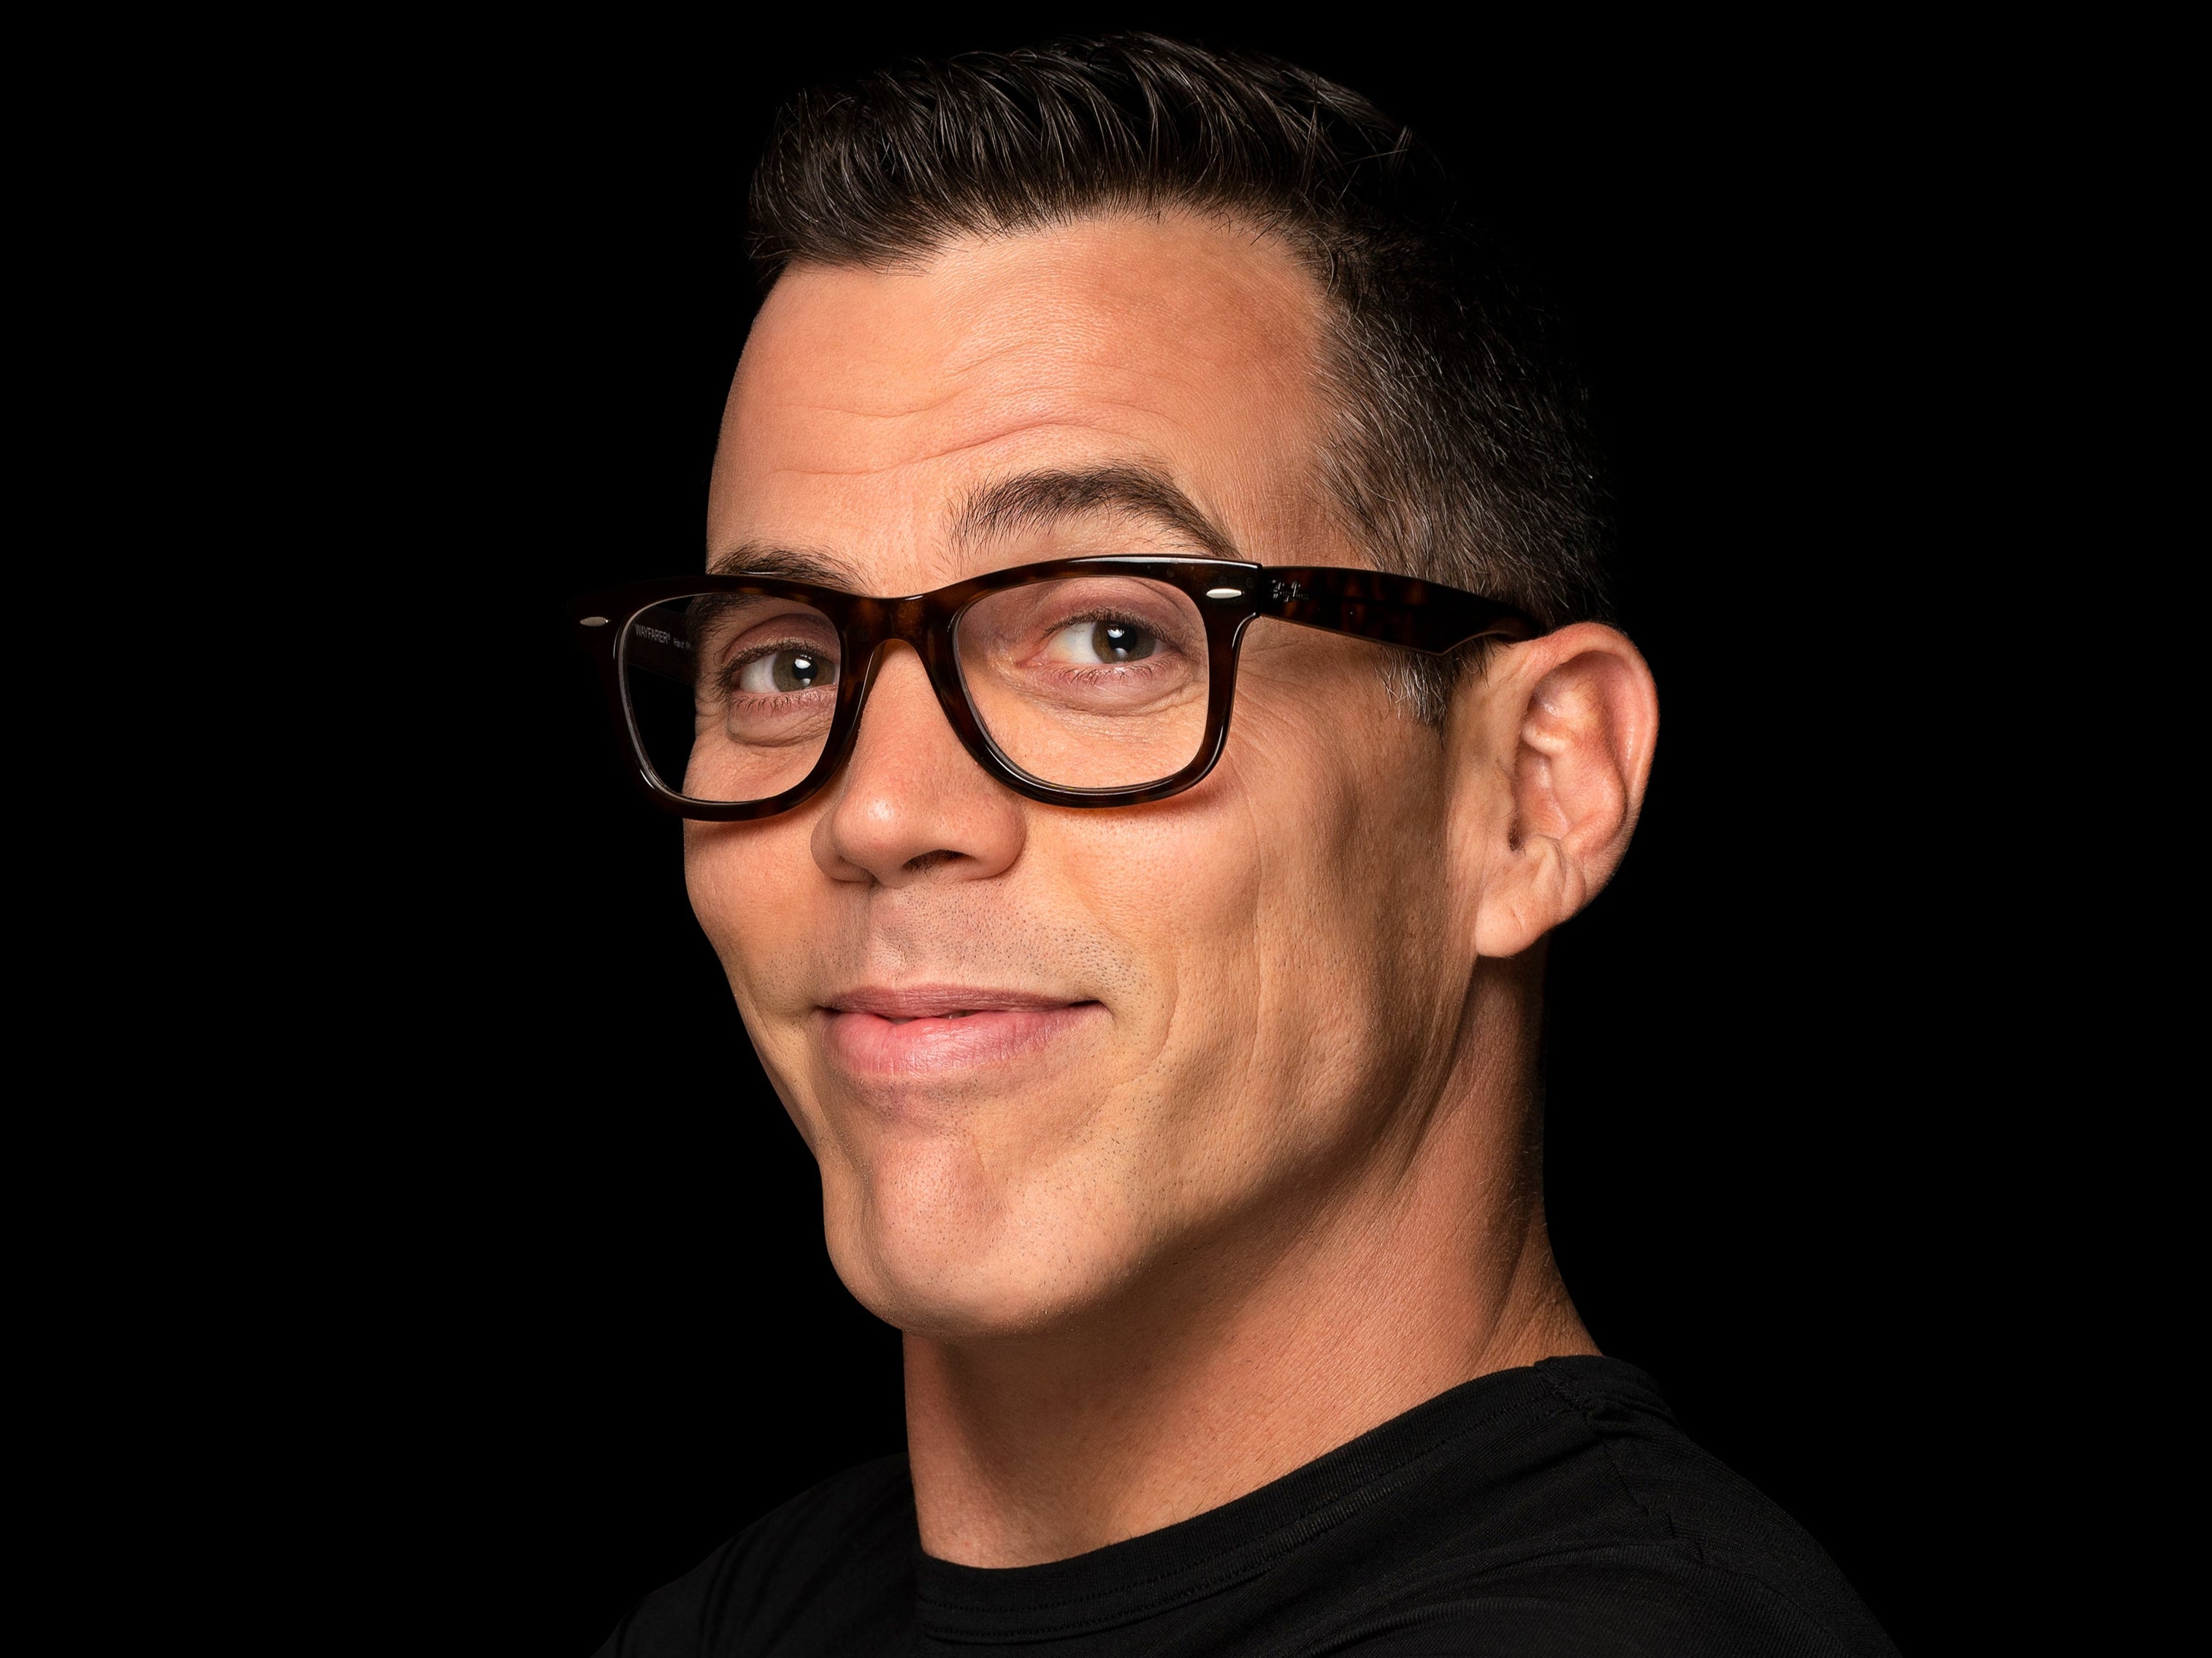 Steve-O: ‘On Love Island I was belligerently drunk, on drugs, and threw a massive temper tantrum’